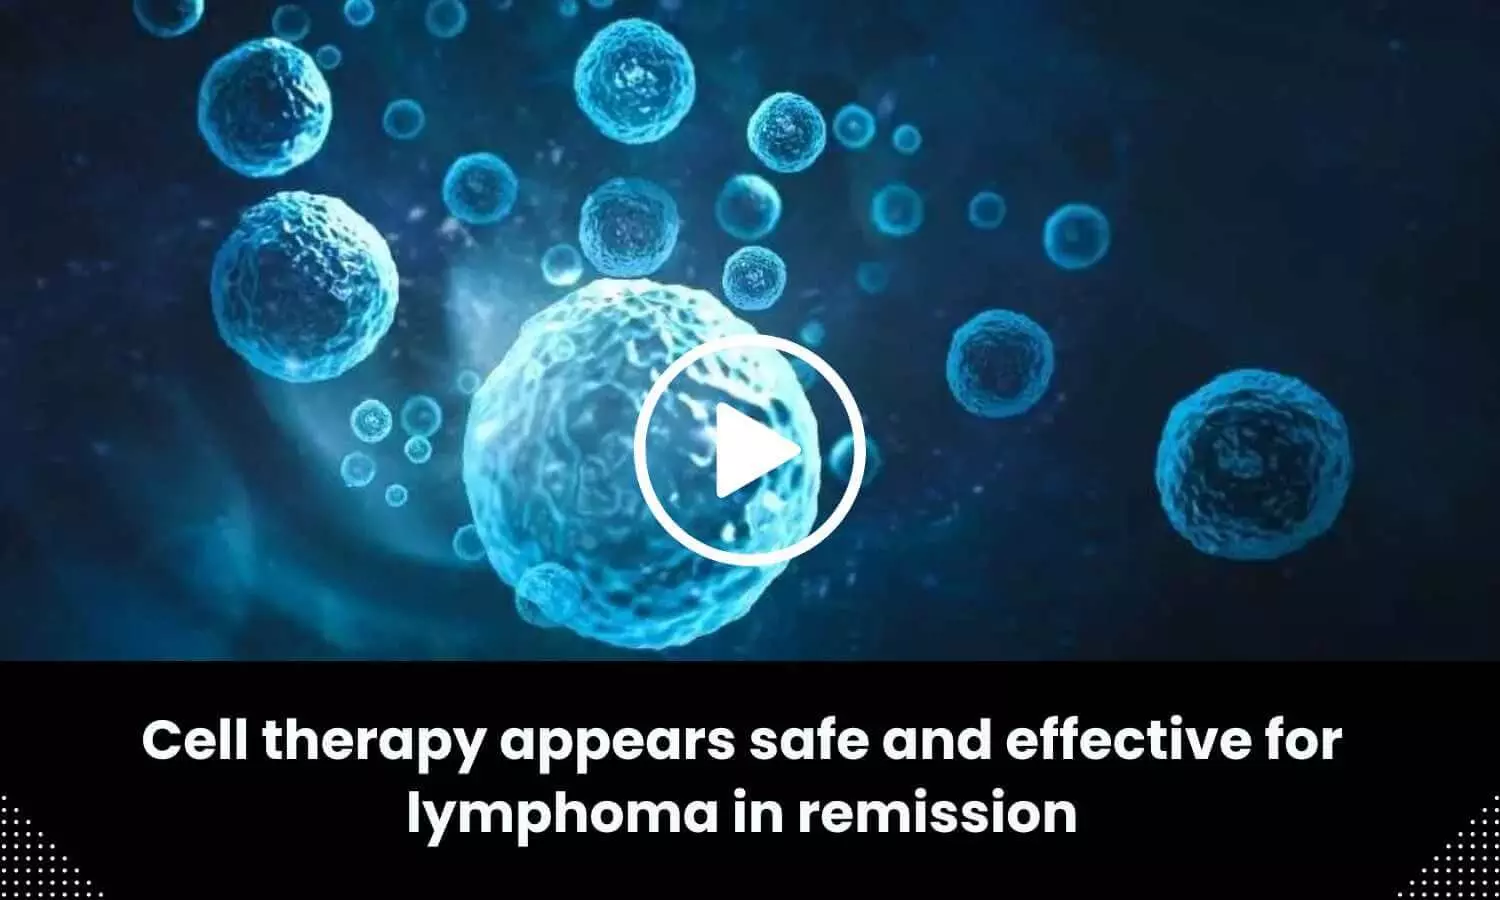 Cell therapy appears safe and effective for lymphoma in remission